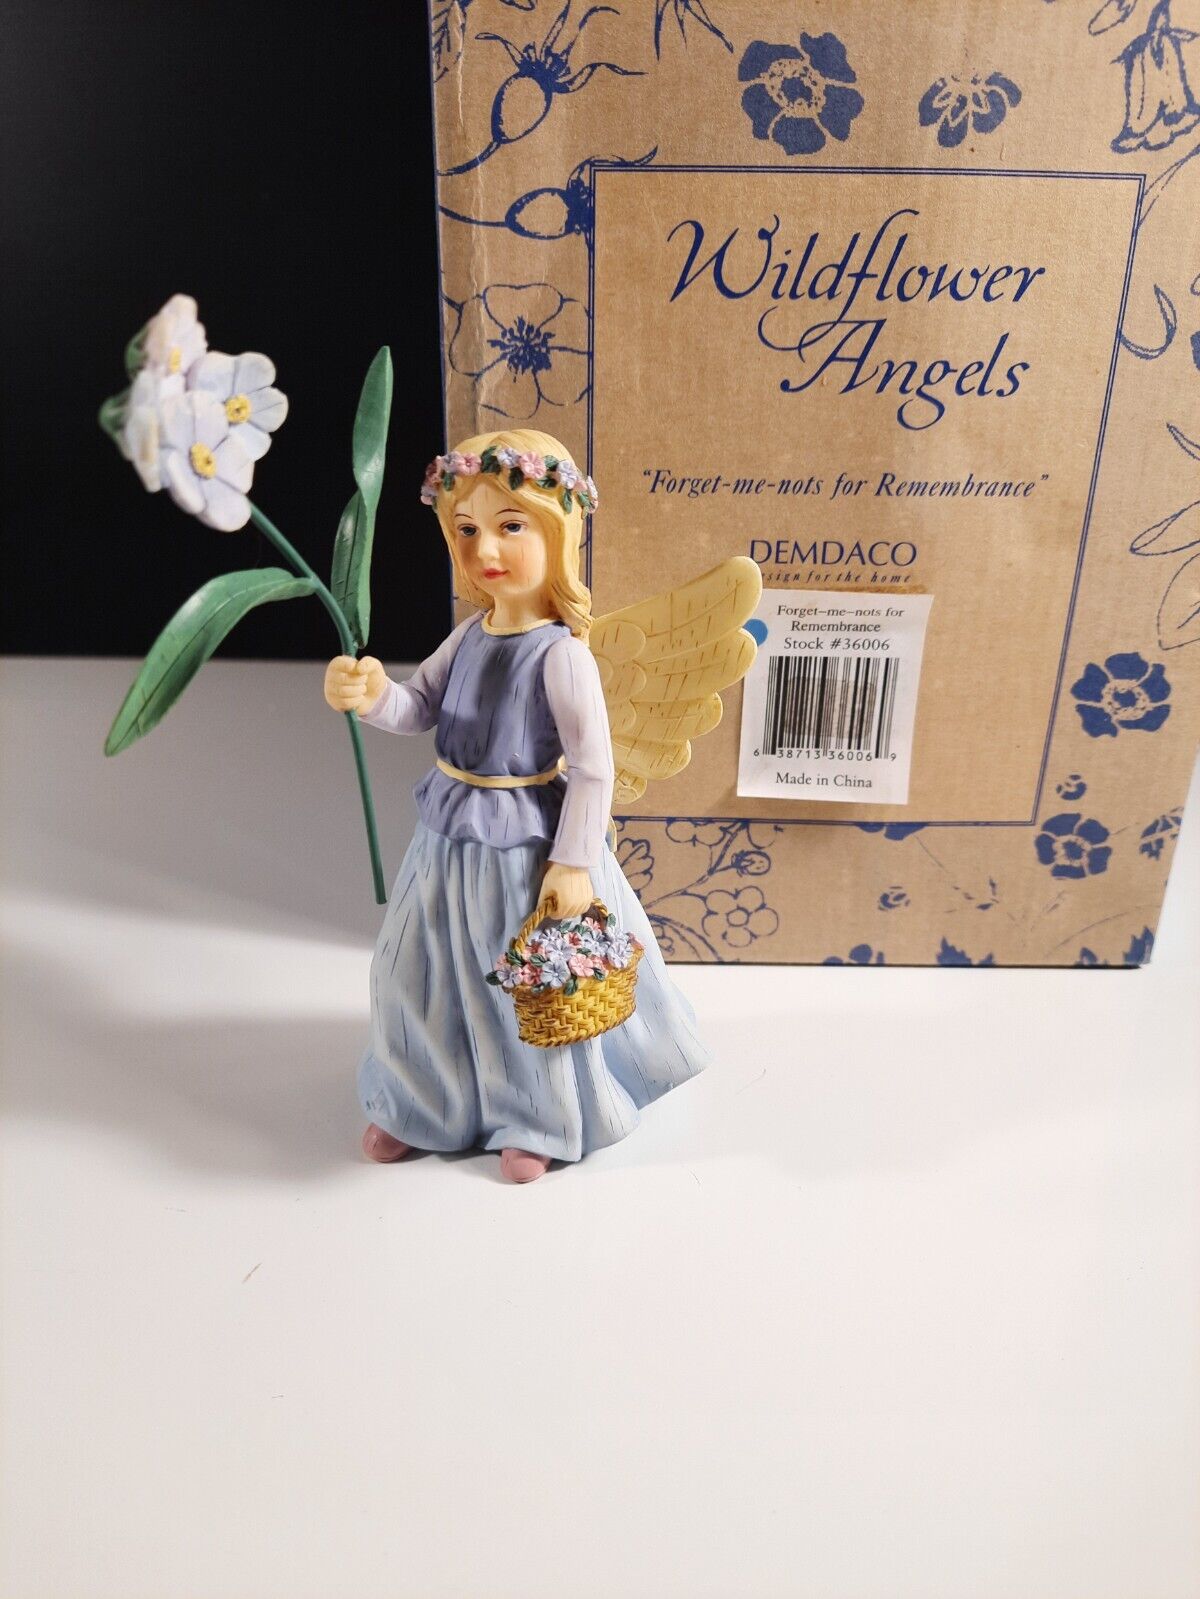 Wildflower Angels DEMDACO Forget-me-Nots for Remembrance